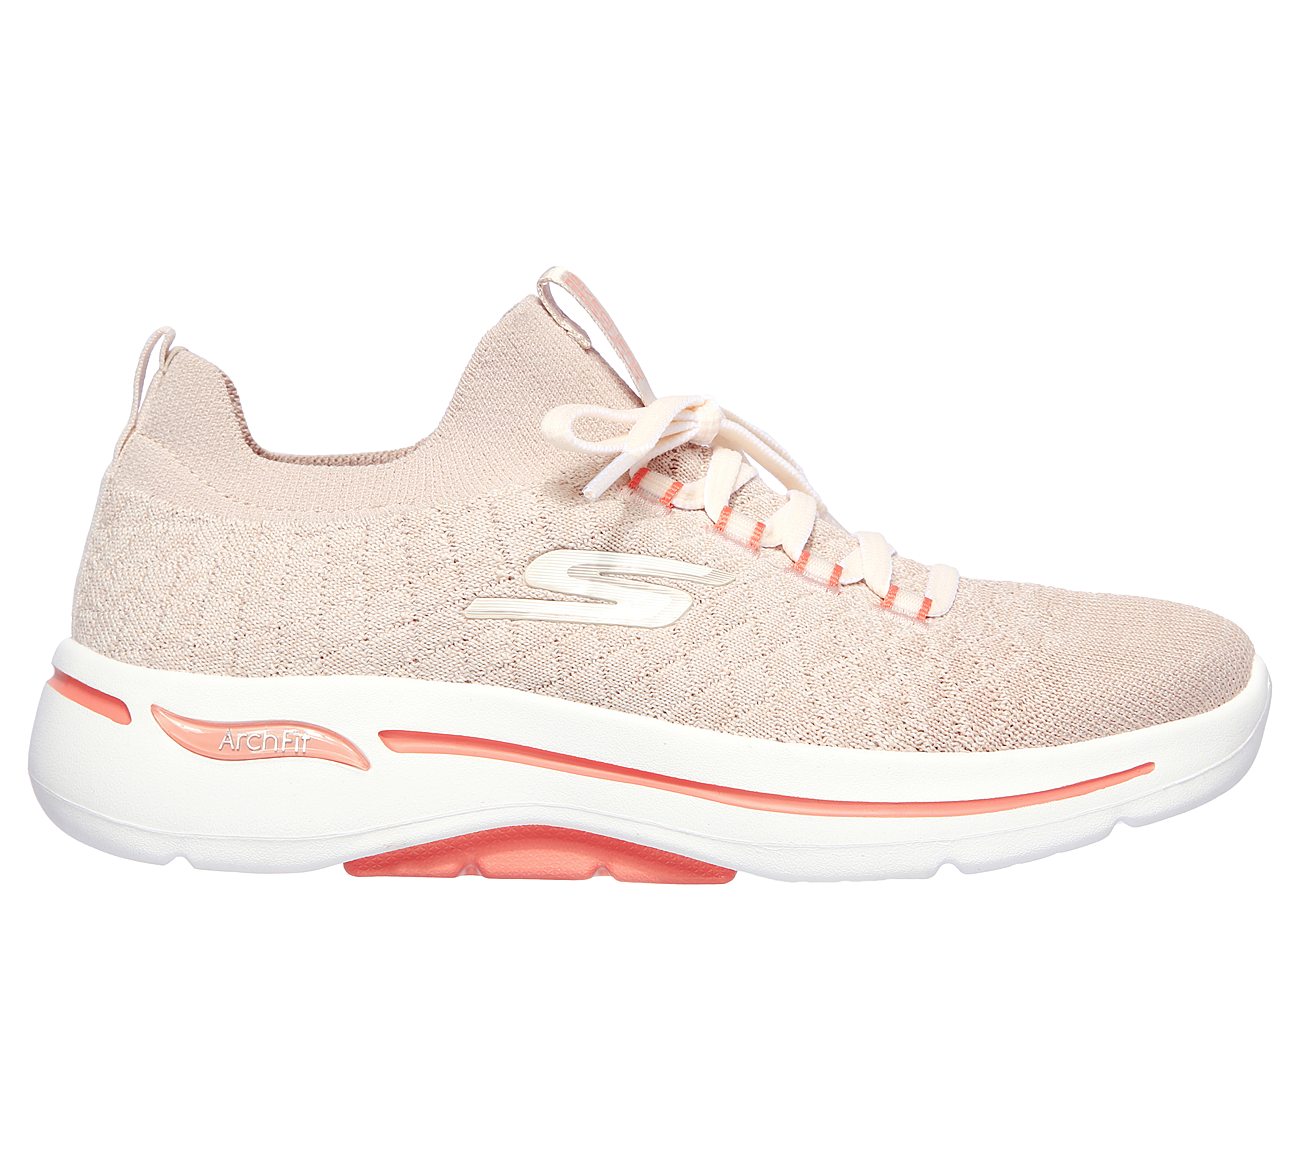 GO WALK ARCH FIT - PEACHY, TAUPE/CORAL Footwear Right View